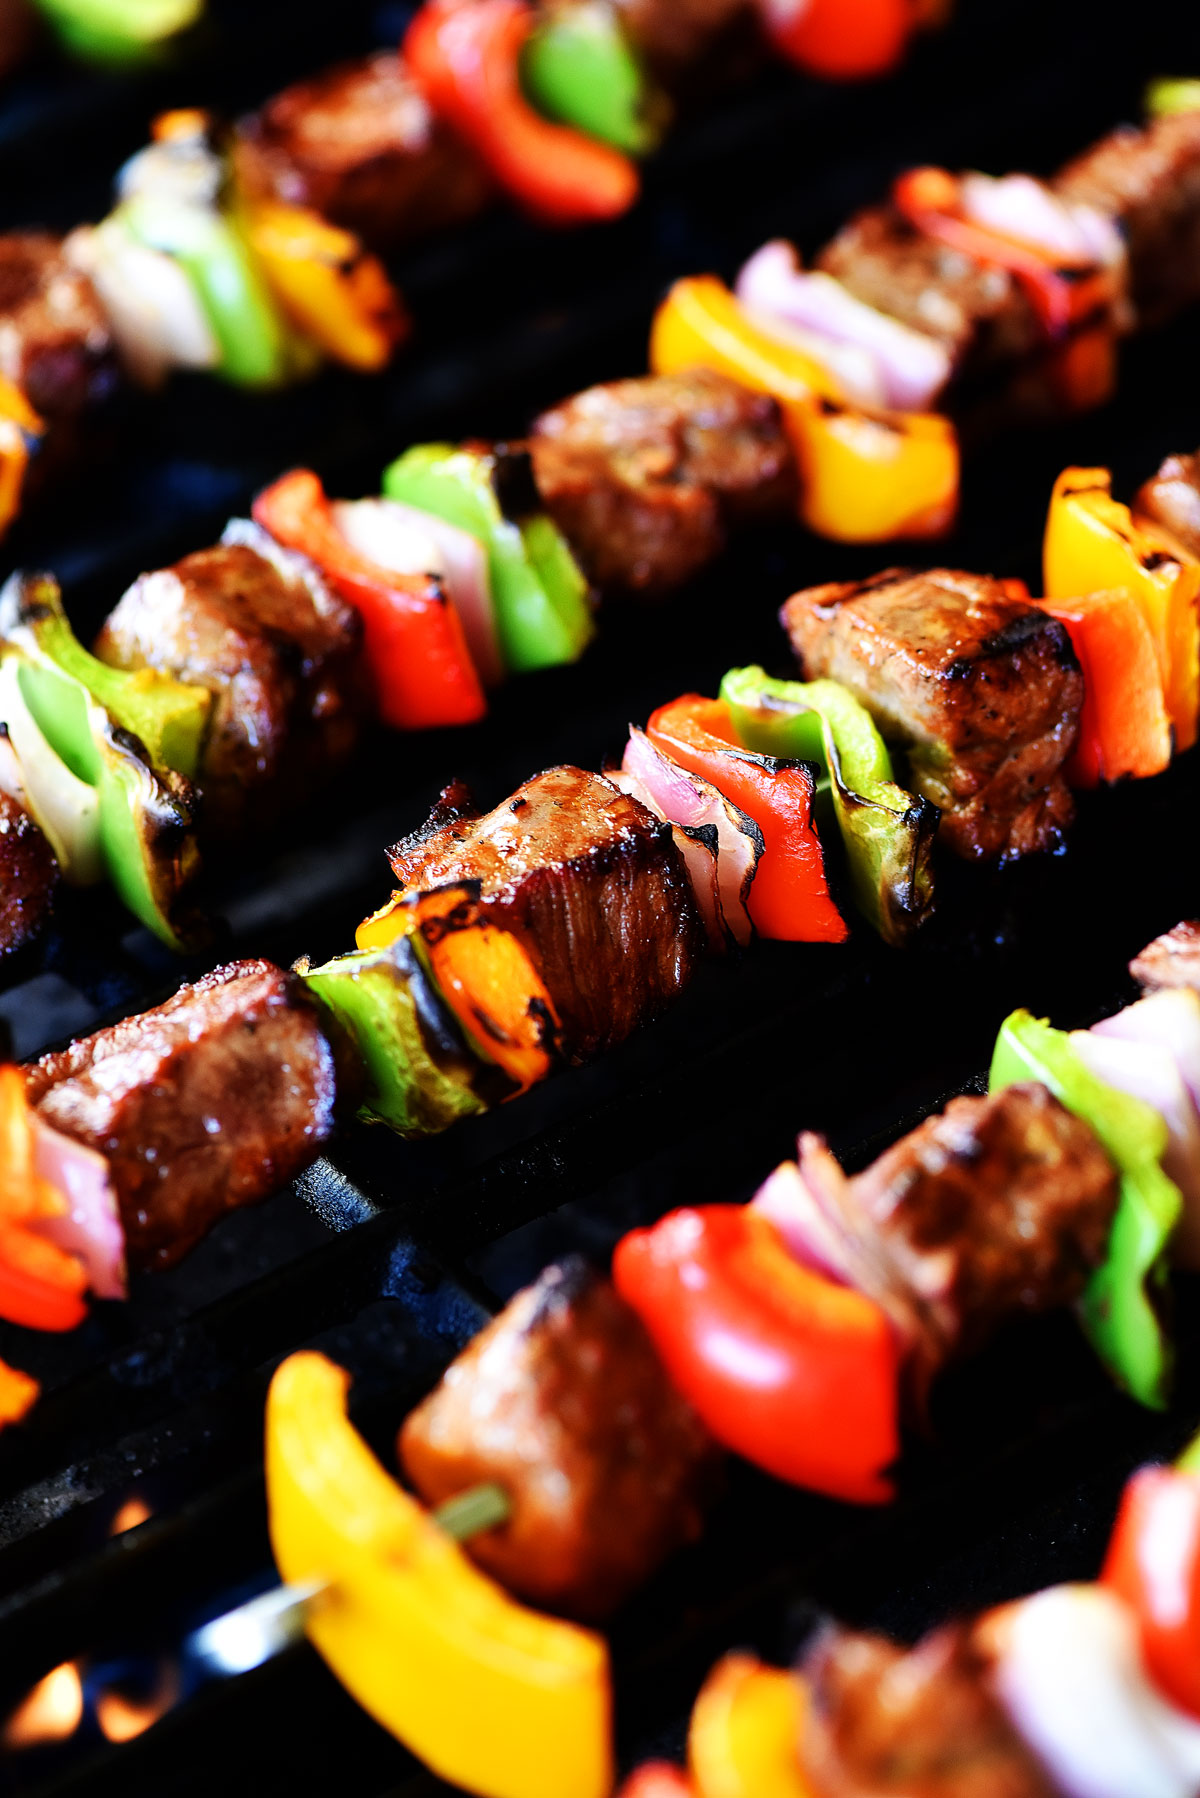 Grilled Steak Kebabs are made of delicious marinated steak pieces with bell peppers and red onion. Life-in-the-Lofthouse.com